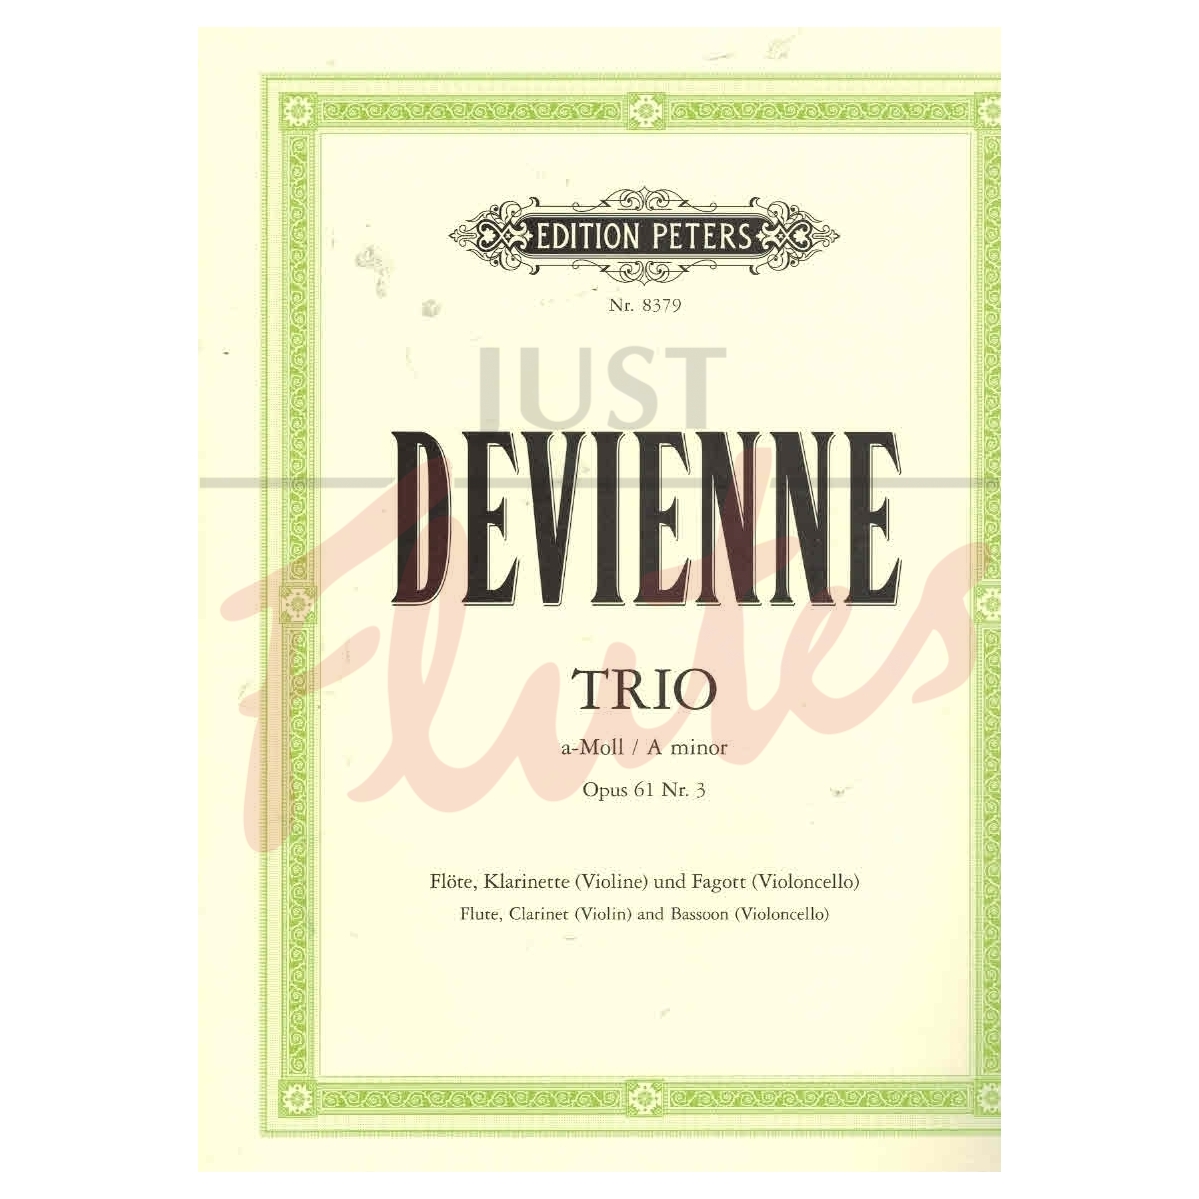 Trio in A minor No.3 for Flute, Clarinet and Bassoon